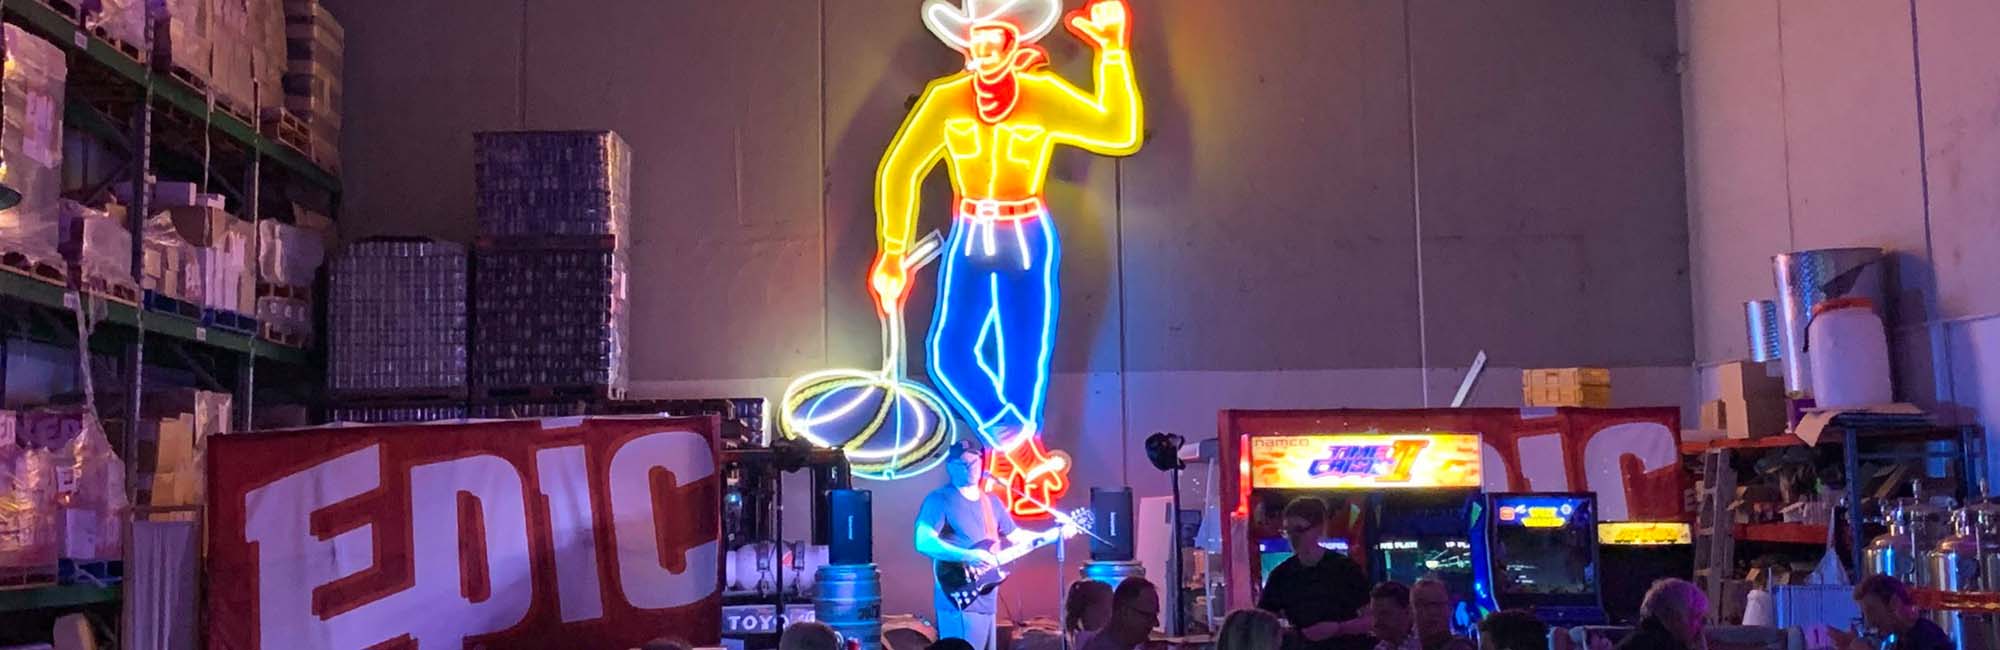 The epic band playing in the Epic Taproom with Big Tex the neon cowboy overlooking. 